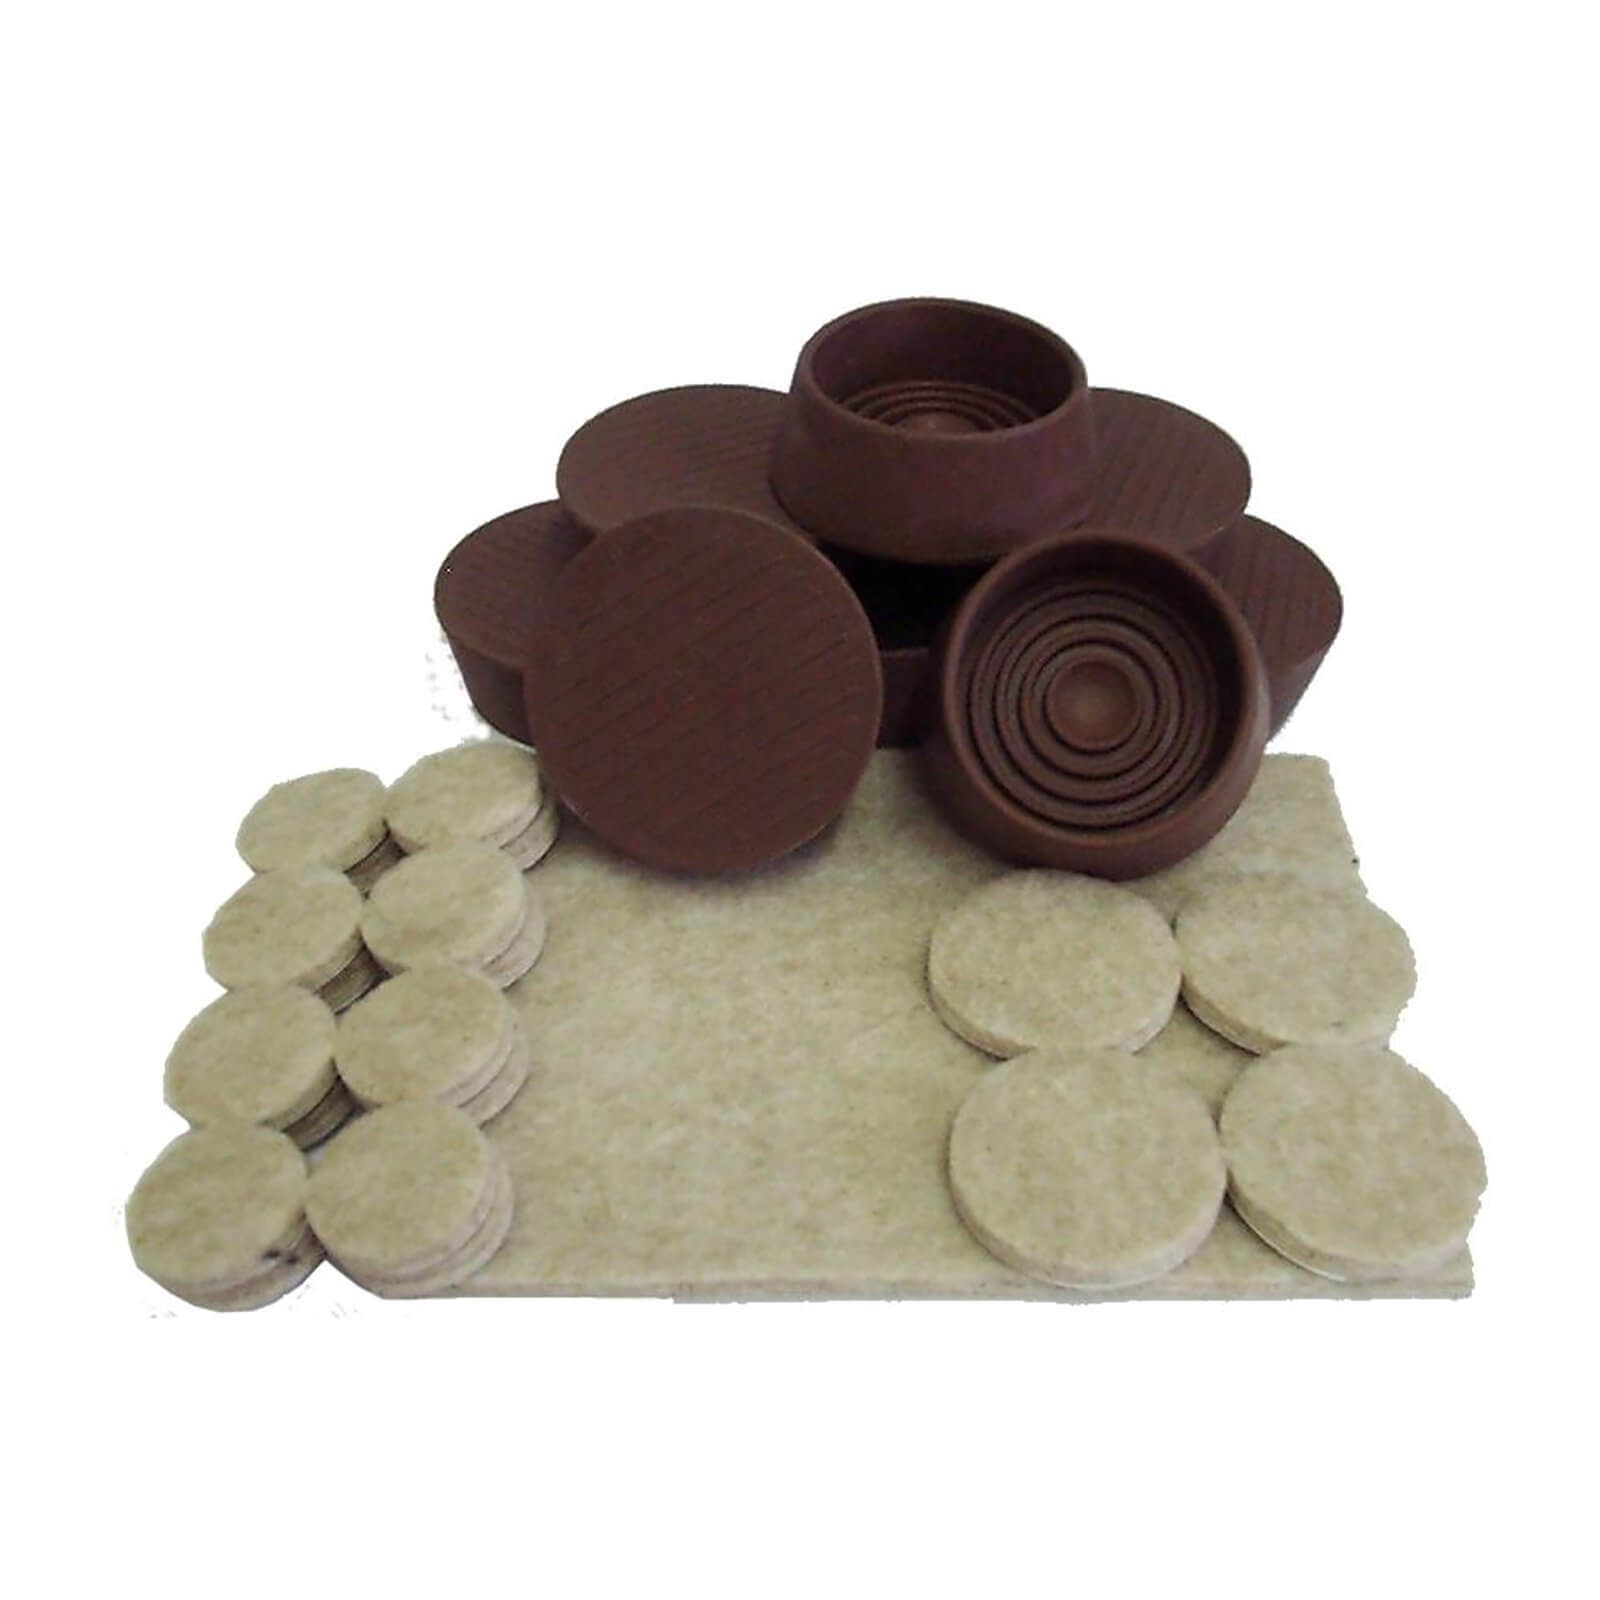 Photo of Felt Pads And Castor Cups - 29 Pack